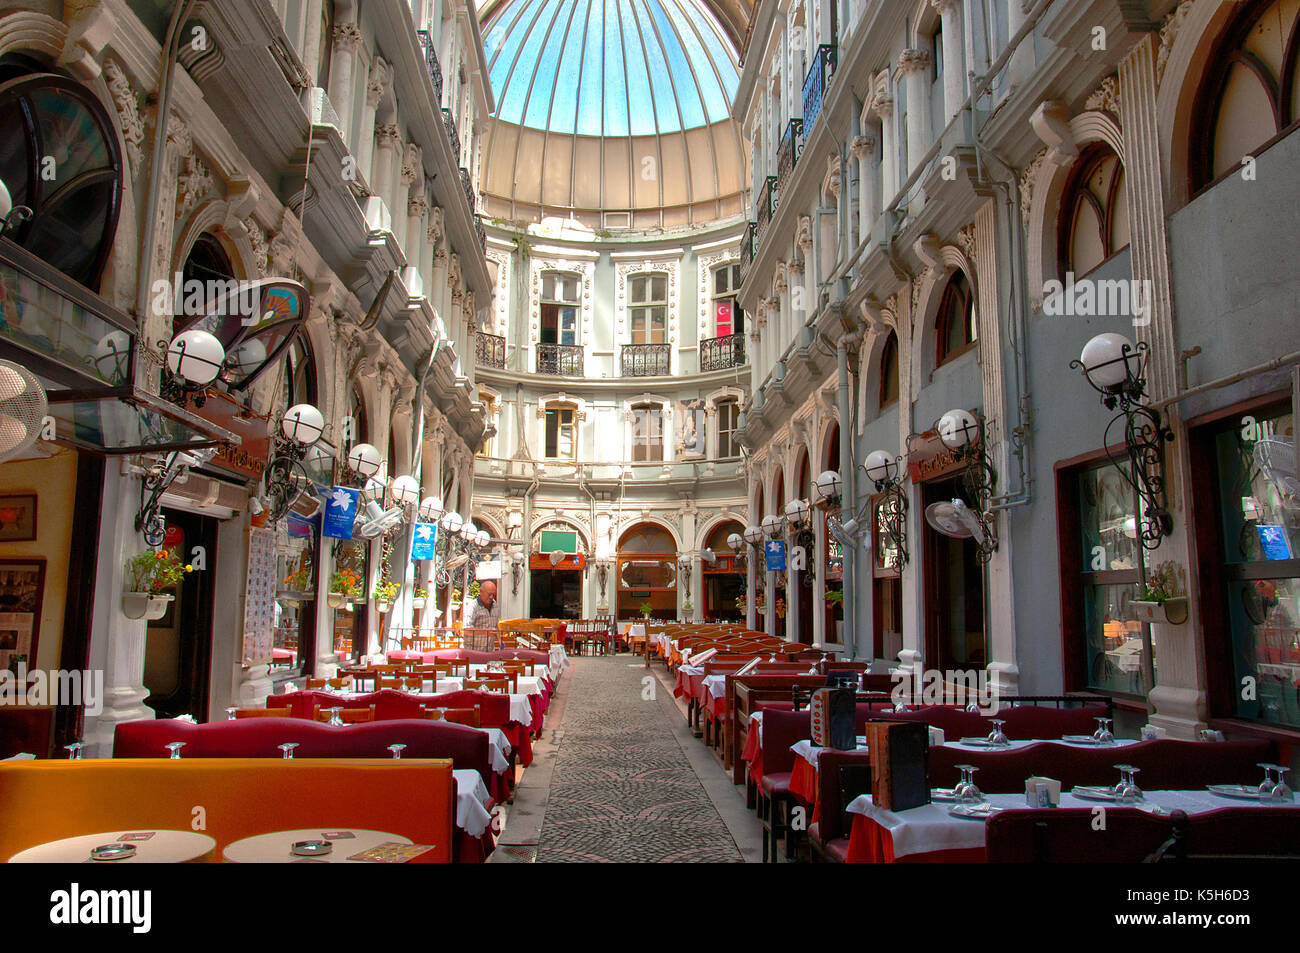 ISTANBUL,TURKEY, AUGUST 26, 2017: Interior shot from Cicek Pasaji (Flower Passage) a famous historic passage with historic cafes and restaurant Stock Photo